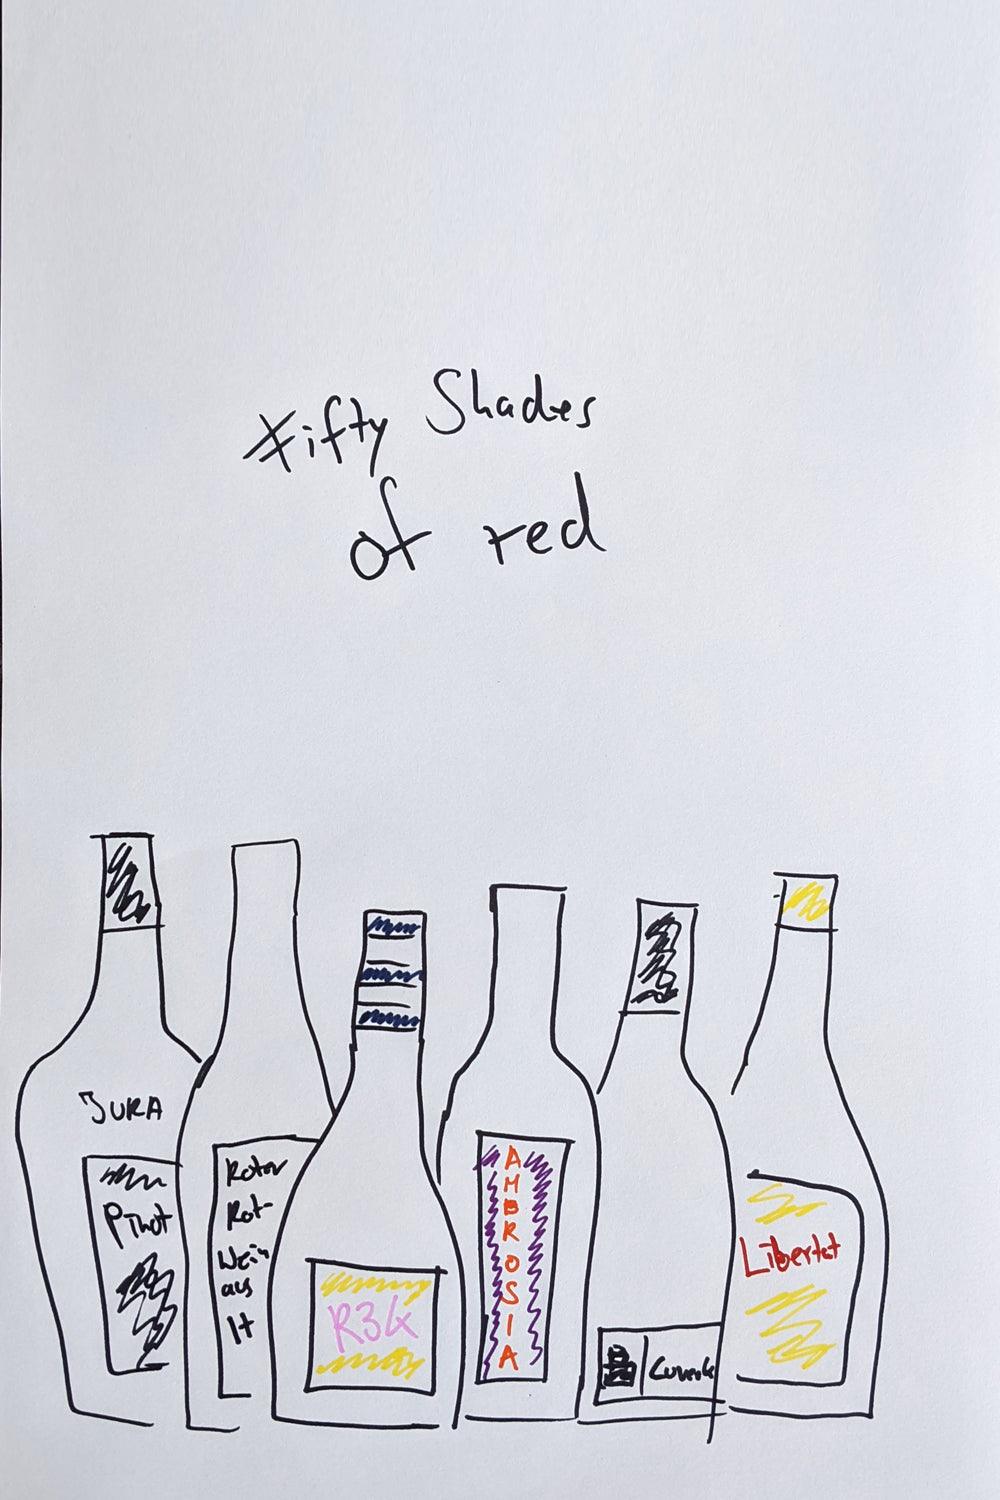 "Fifty shades of red" - Weinpaket - Vino Infernale 